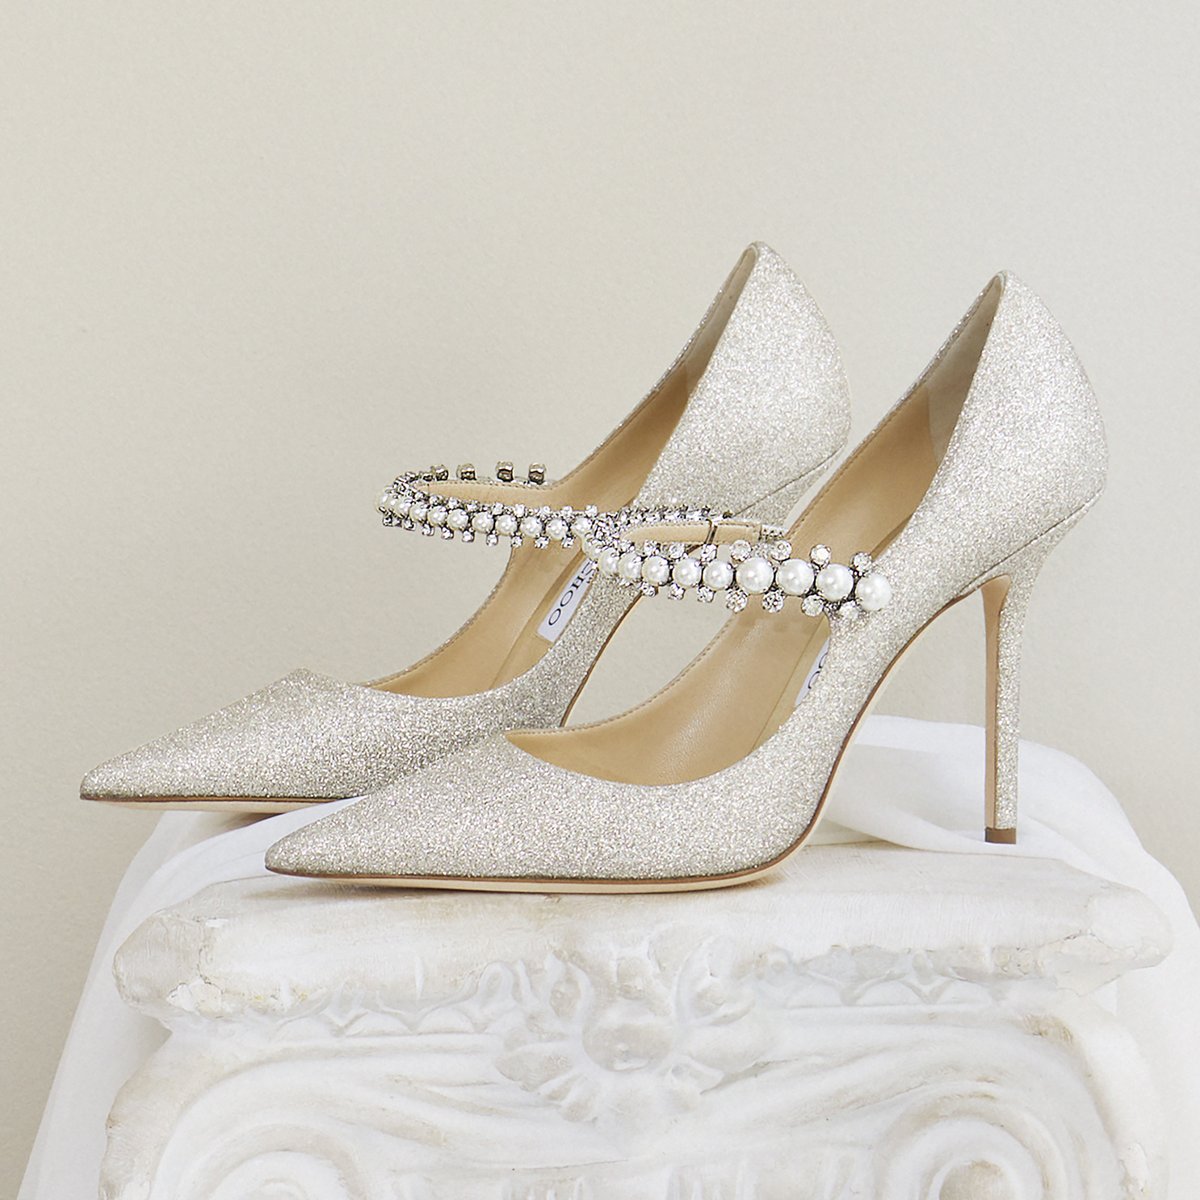 Say #IDOINCHOO in the BAILY pumps featuring a timeless crystal and pearl strap #JimmyChoo 

bit.ly/BRIDAL_JC_